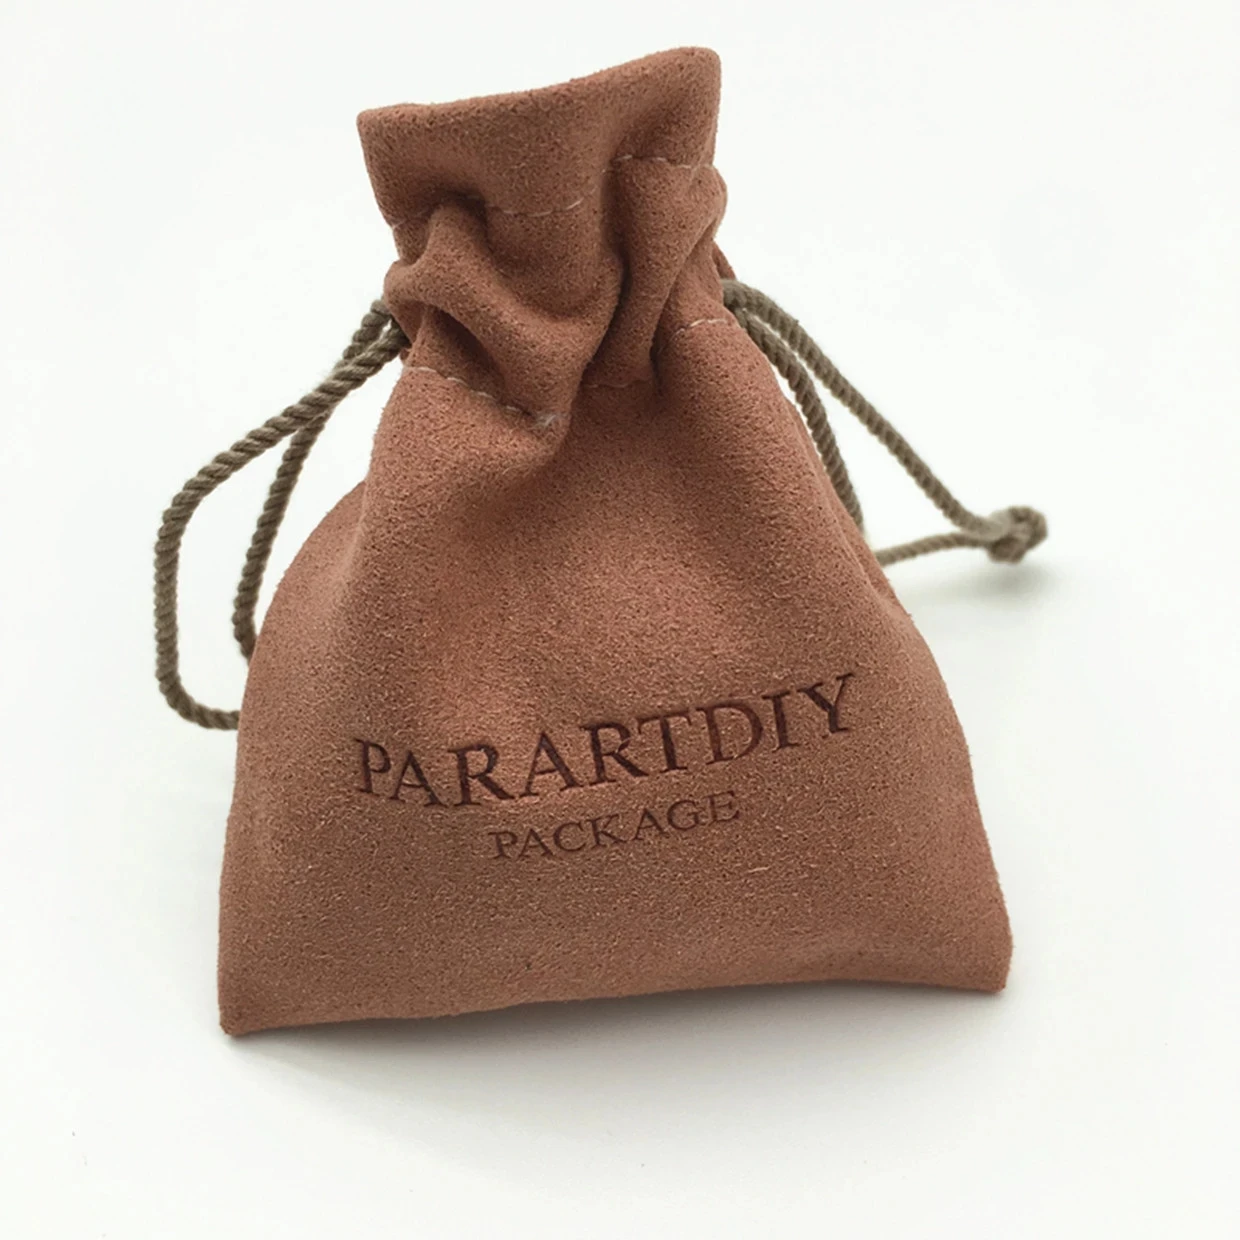 50pcs personalized color logo drawstring bag custom bagging bag jewelry pouch necklace bag suede bag skin care product pouch